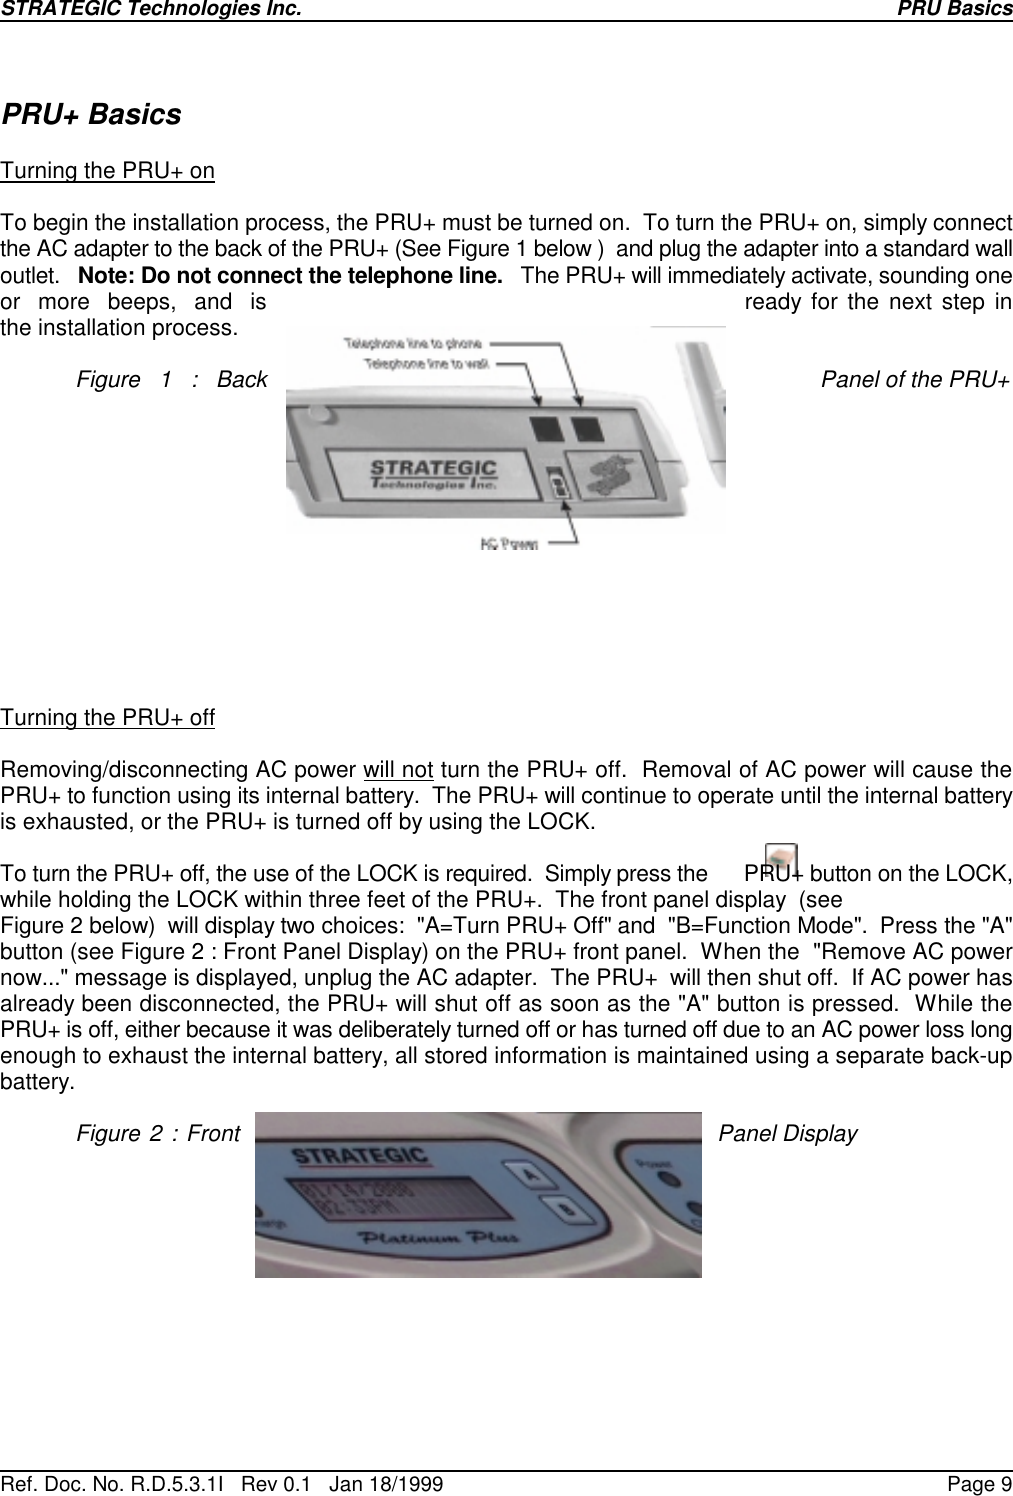 STRATEGIC Technologies Inc.Ref. Doc. No. R.D.5.3.1I   Rev 0.1   Jan 18/1999PRU BasicsPage 9PRU+ BasicsTurning the PRU+ onTo begin the installation process, the PRU+ must be turned on.  To turn the PRU+ on, simply connectthe AC adapter to the back of the PRU+ (See Figure 1 below )  and plug the adapter into a standard walloutlet.   Note: Do not connect the telephone line.   The PRU+ will immediately activate, sounding oneor  more  beeps,  and  is ready for the next step inthe installation process.Figure 1 : Back Panel of the PRU+Turning the PRU+ offRemoving/disconnecting AC power will not turn the PRU+ off.  Removal of AC power will cause thePRU+ to function using its internal battery.  The PRU+ will continue to operate until the internal batteryis exhausted, or the PRU+ is turned off by using the LOCK.To turn the PRU+ off, the use of the LOCK is required.  Simply press the      PRU+ button on the LOCK,while holding the LOCK within three feet of the PRU+.  The front panel display  (seeFigure 2 below)  will display two choices:  &quot;A=Turn PRU+ Off&quot; and  &quot;B=Function Mode&quot;.  Press the &quot;A&quot;button (see Figure 2 : Front Panel Display) on the PRU+ front panel.  When the  &quot;Remove AC powernow...&quot; message is displayed, unplug the AC adapter.  The PRU+  will then shut off.  If AC power hasalready been disconnected, the PRU+ will shut off as soon as the &quot;A&quot; button is pressed.  While thePRU+ is off, either because it was deliberately turned off or has turned off due to an AC power loss longenough to exhaust the internal battery, all stored information is maintained using a separate back-upbattery.Figure 2 : Front Panel Display